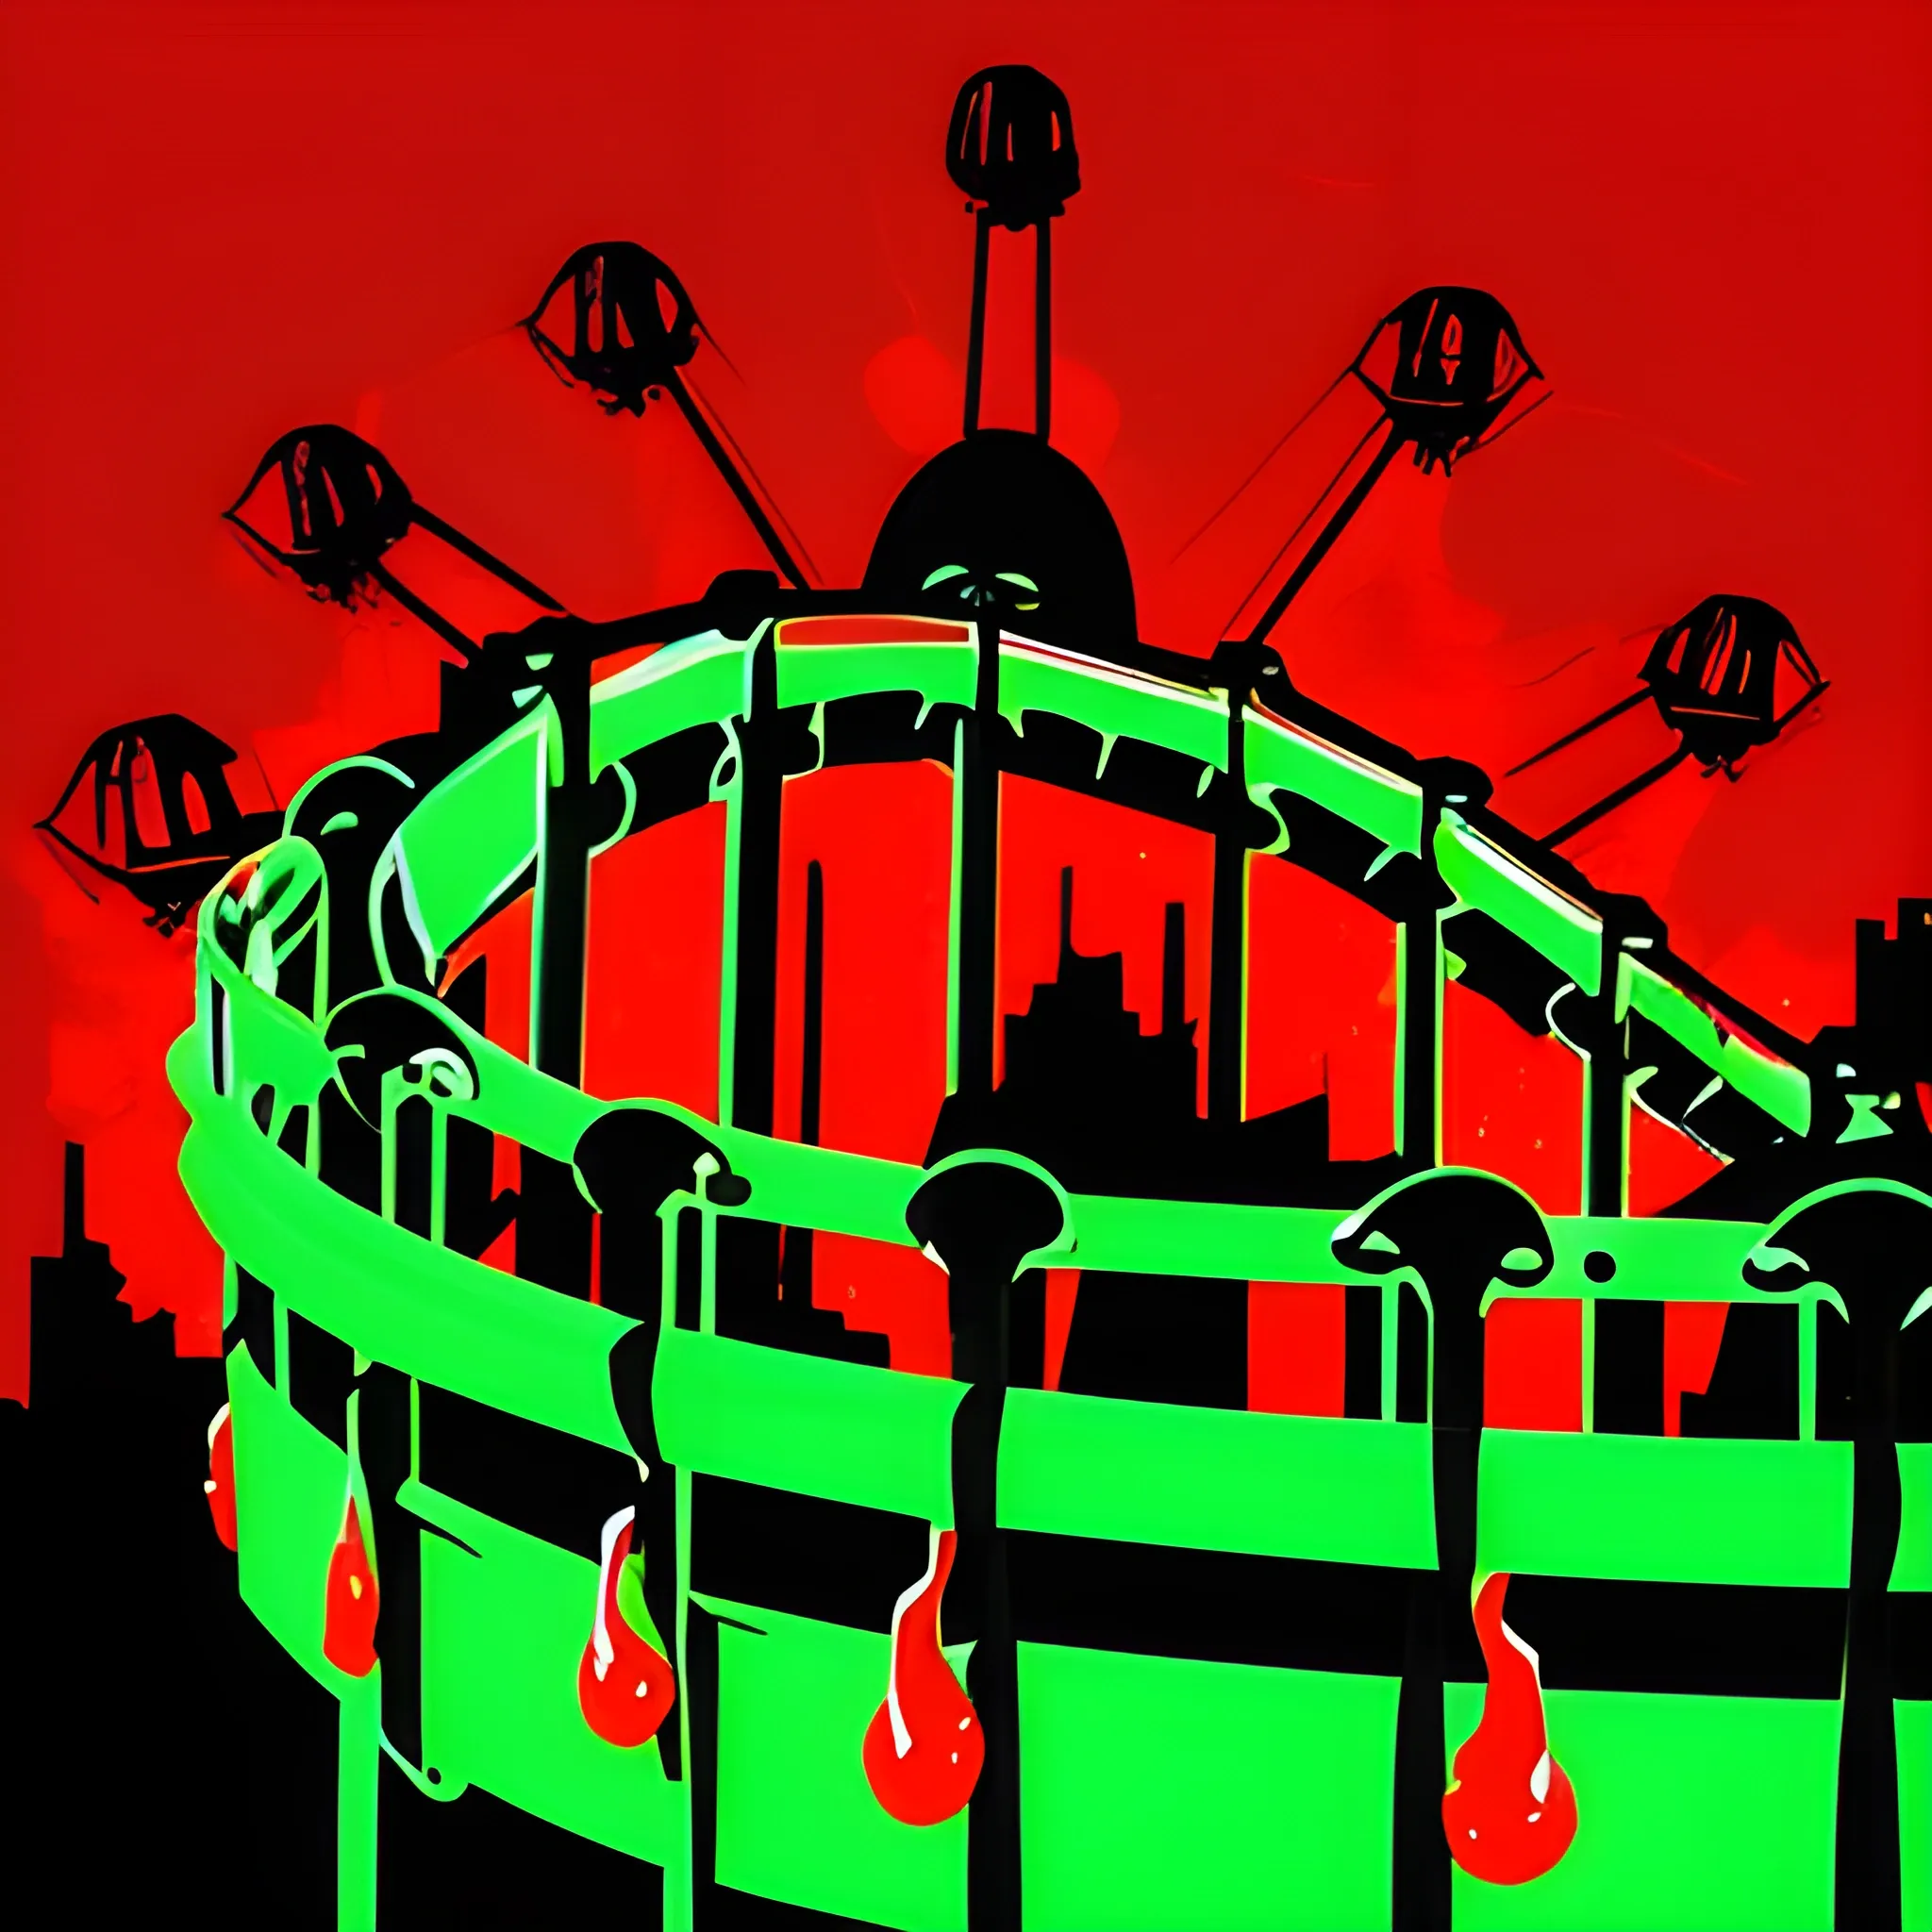 amusement park rides in silhouette with a red blood dripping or green "blood dripping." Maybe include or not a sketch of the wrapped body.